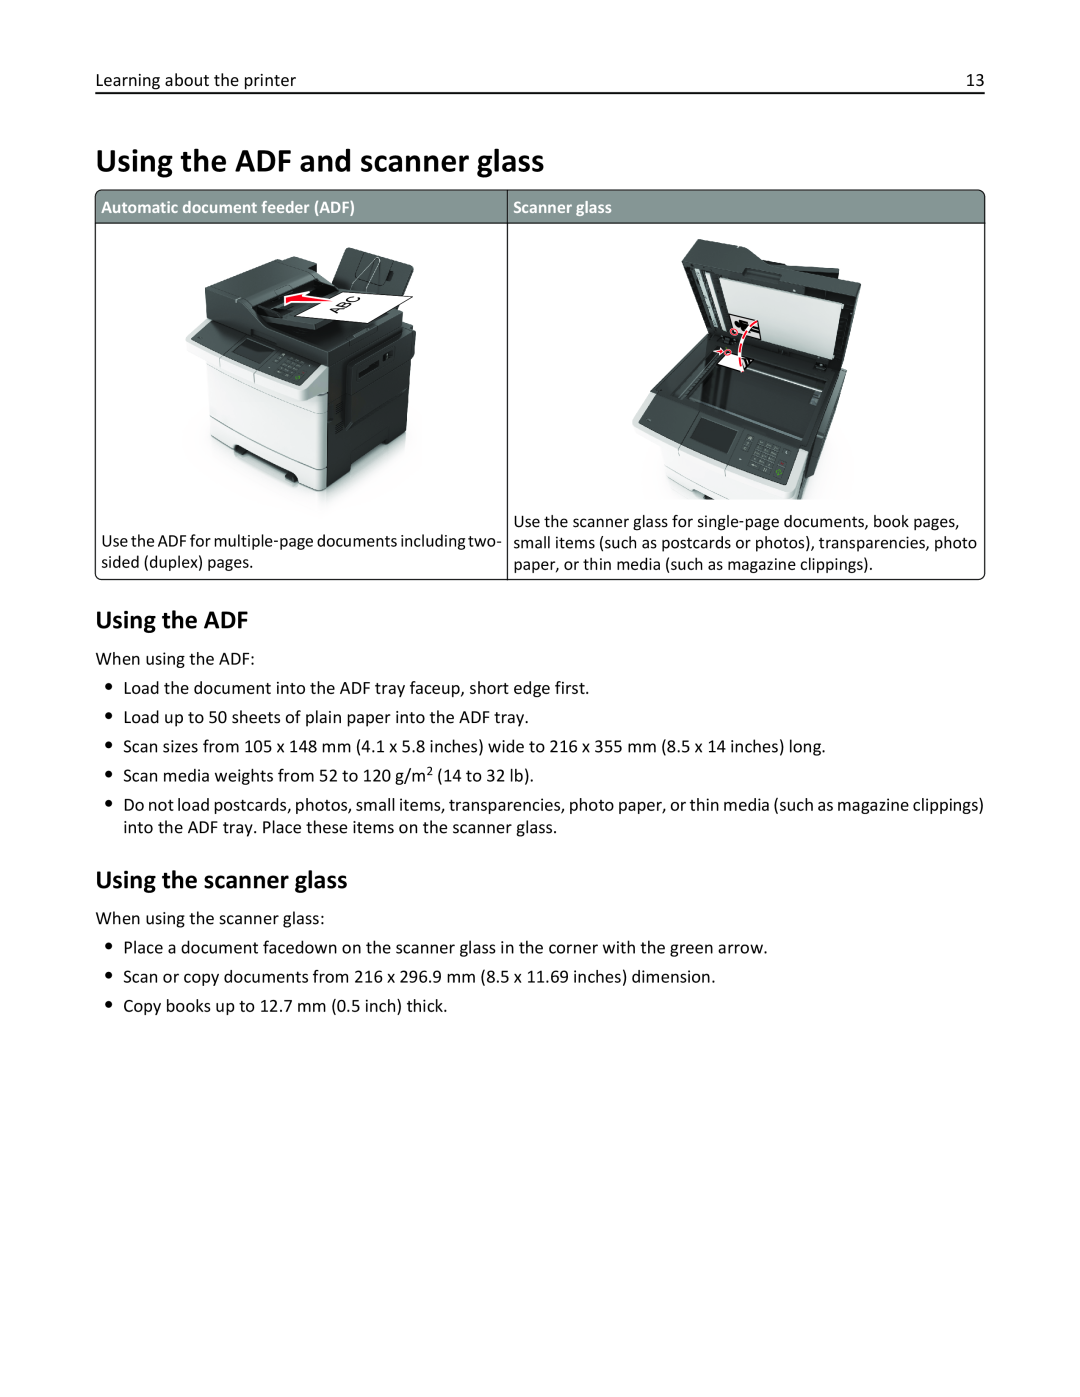 Lexmark 436 manual Using the ADF and scanner glass, Using the scanner glass 